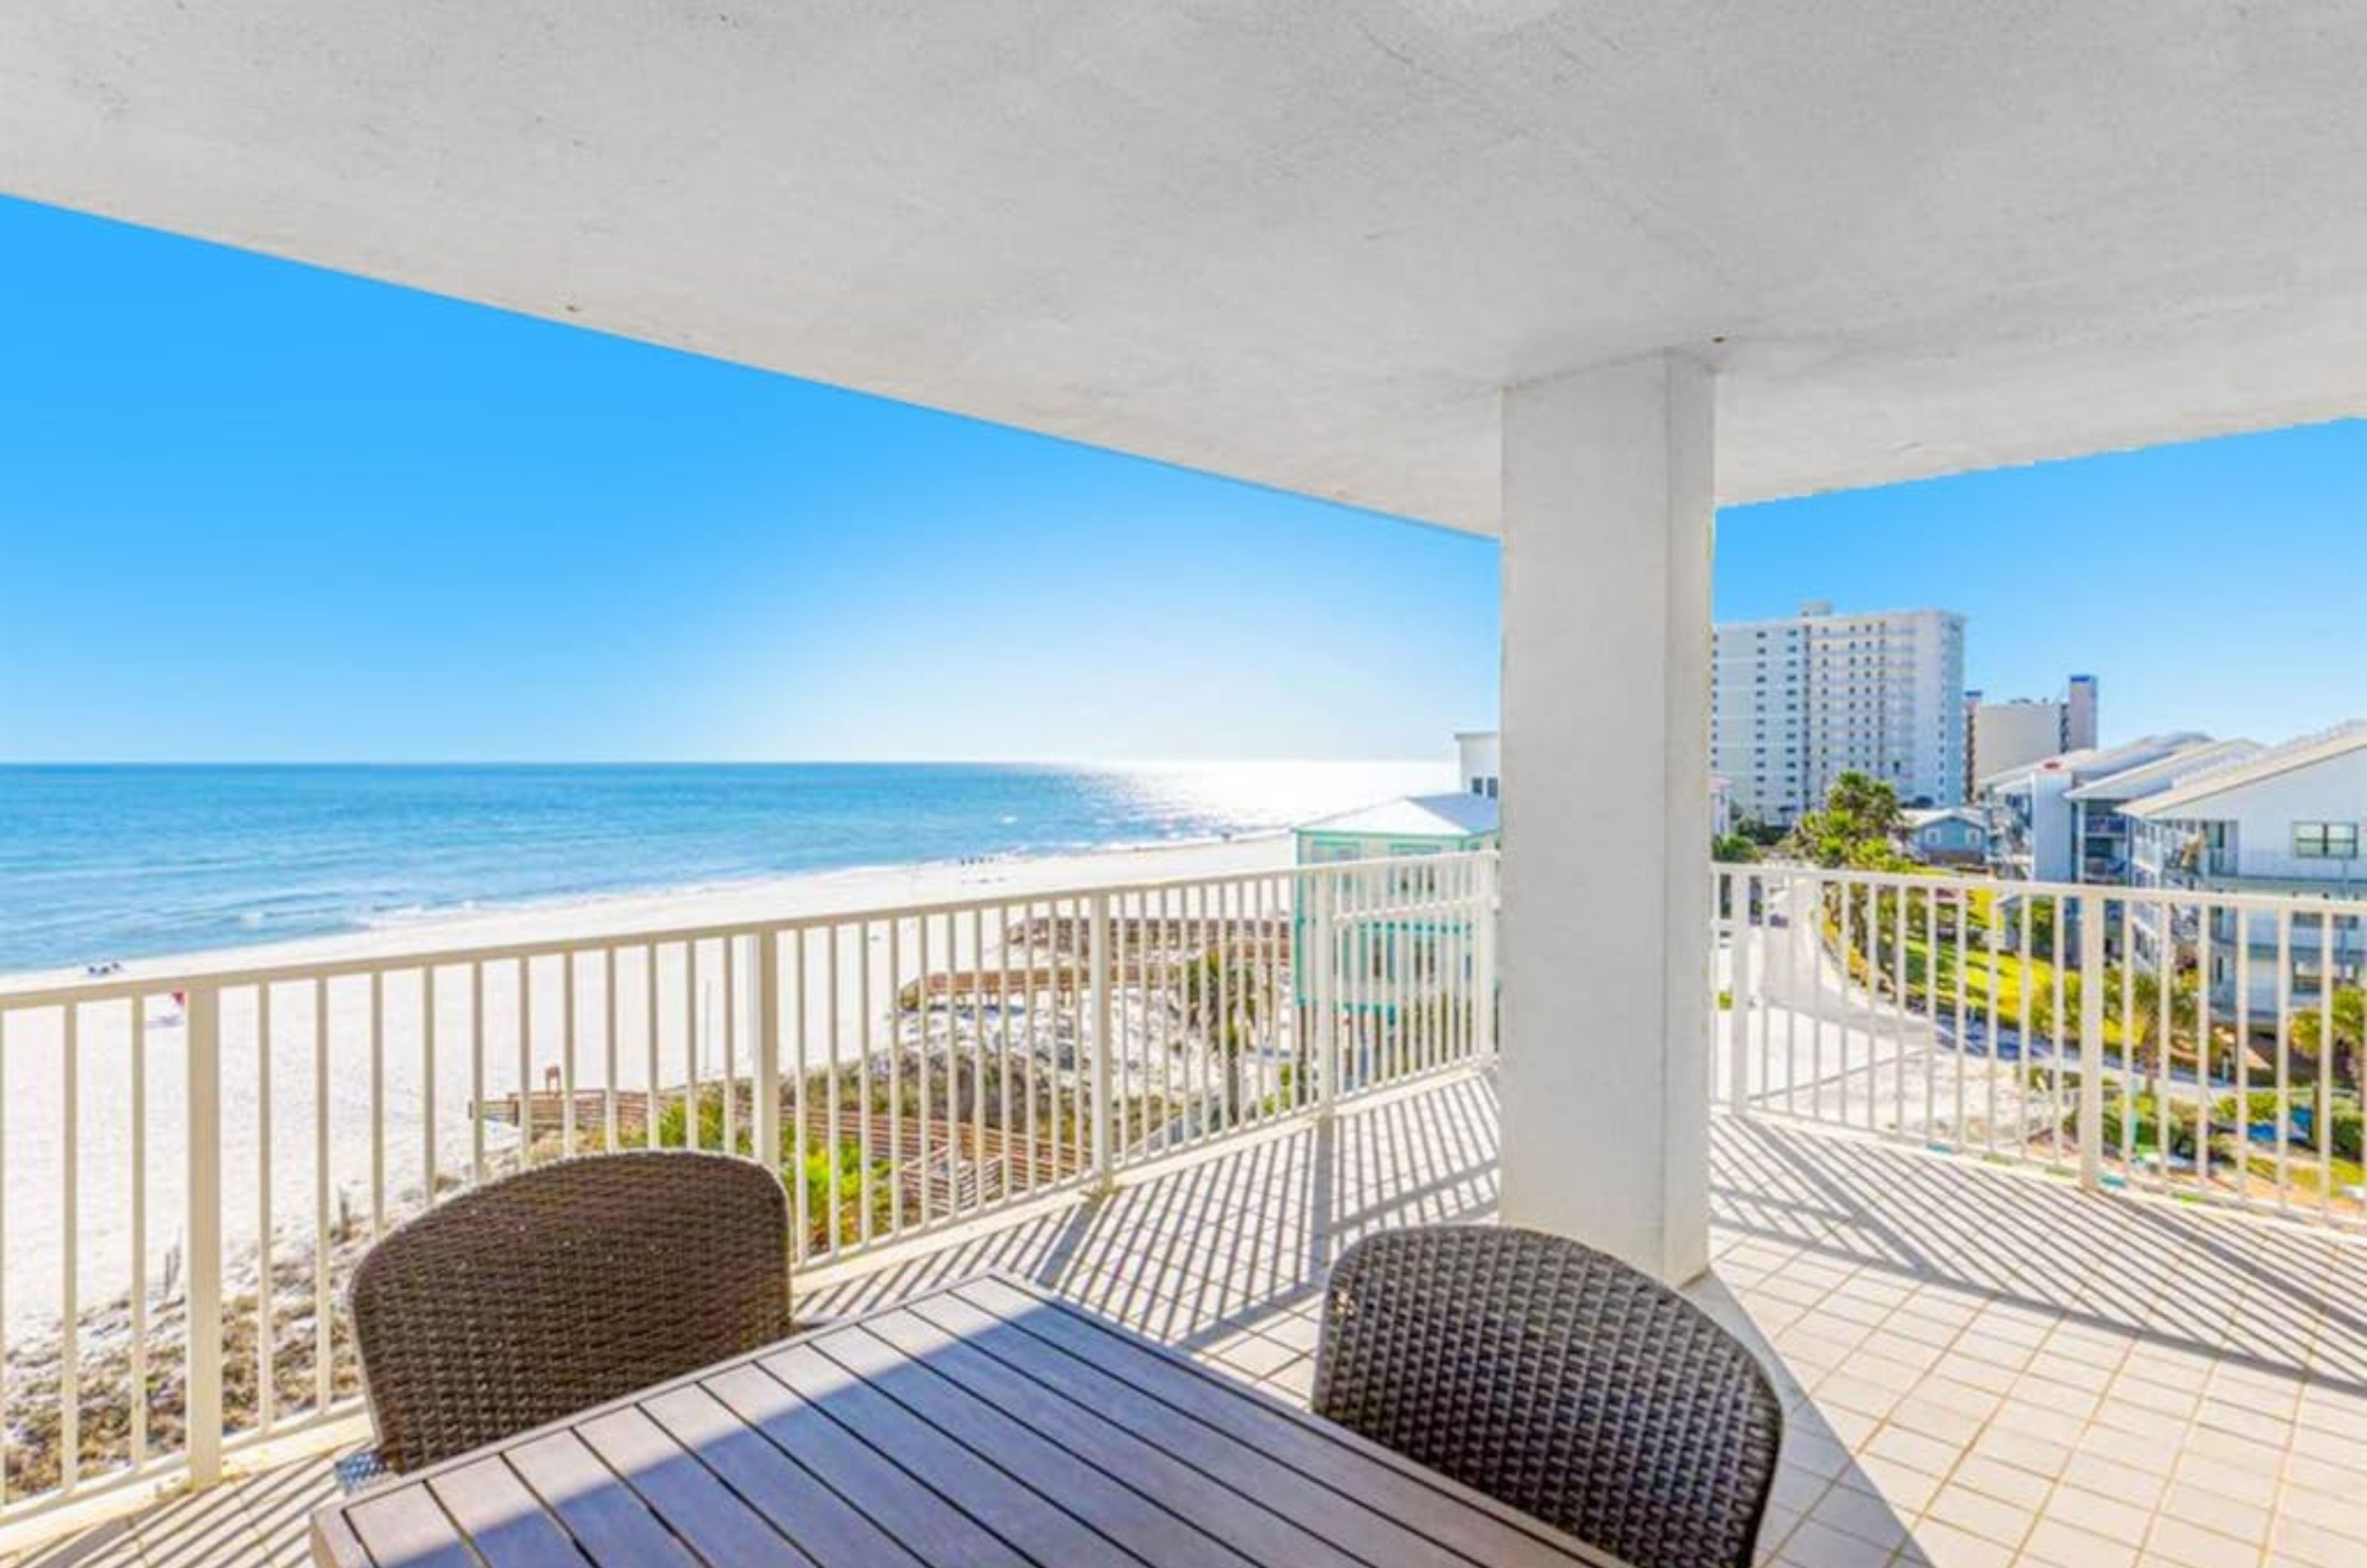 A private balcony overlooking the Gulf at Shoalwater Condominiums in Orange Beach Alabama 